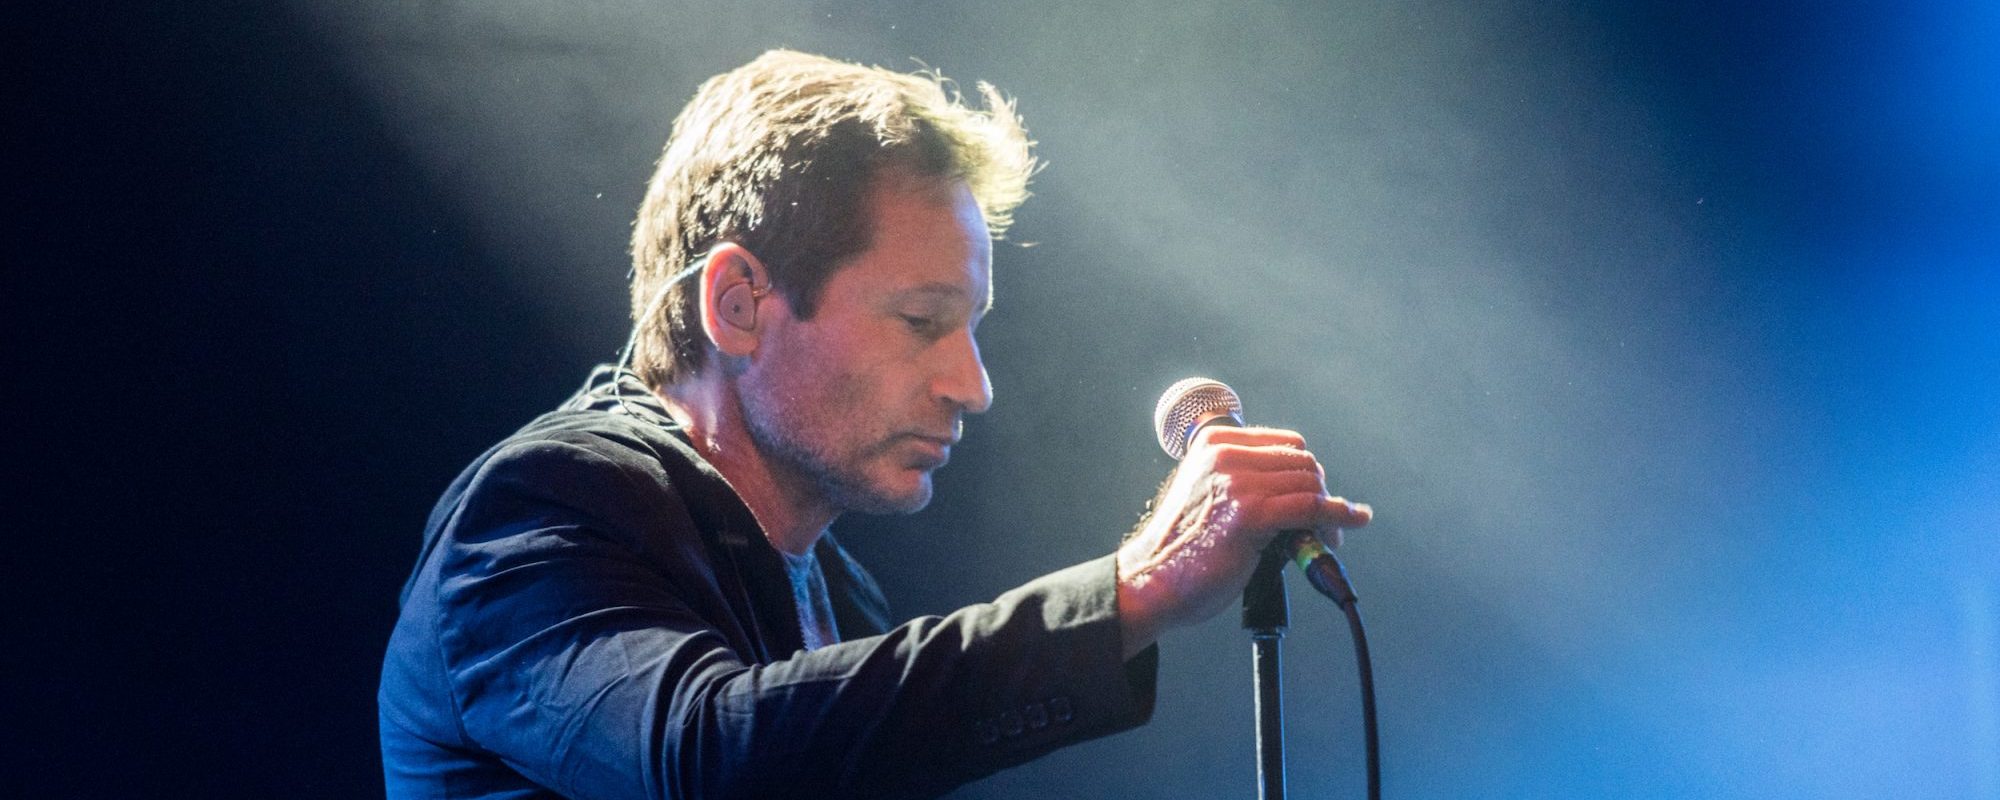 Review: File As Worthwhile—David Duchovny Makes a Decent Gesture